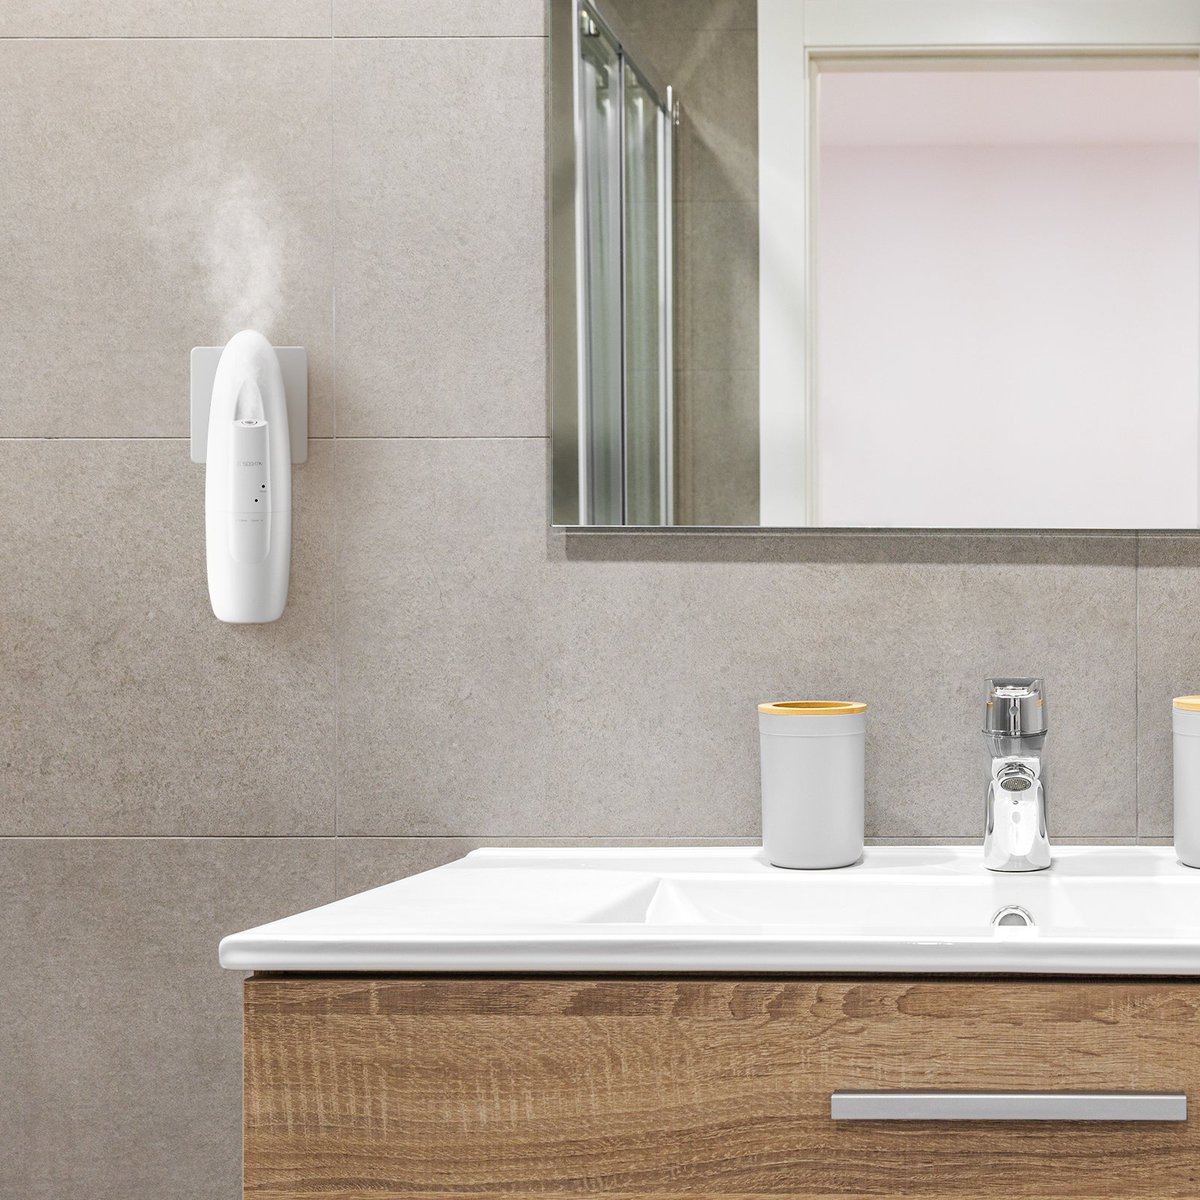 Are you looking for solutions for your
bathroom? 🚿🚻
Our plug-and-play aroma diffuser, your go-to solution
for effortlessly removing odors.

#ultrasonicdiffuser #airfreshener #odorcontrol
#bathroomdecor #BathroomCleaning #香り空間
#OdorFree #aromadiffuser